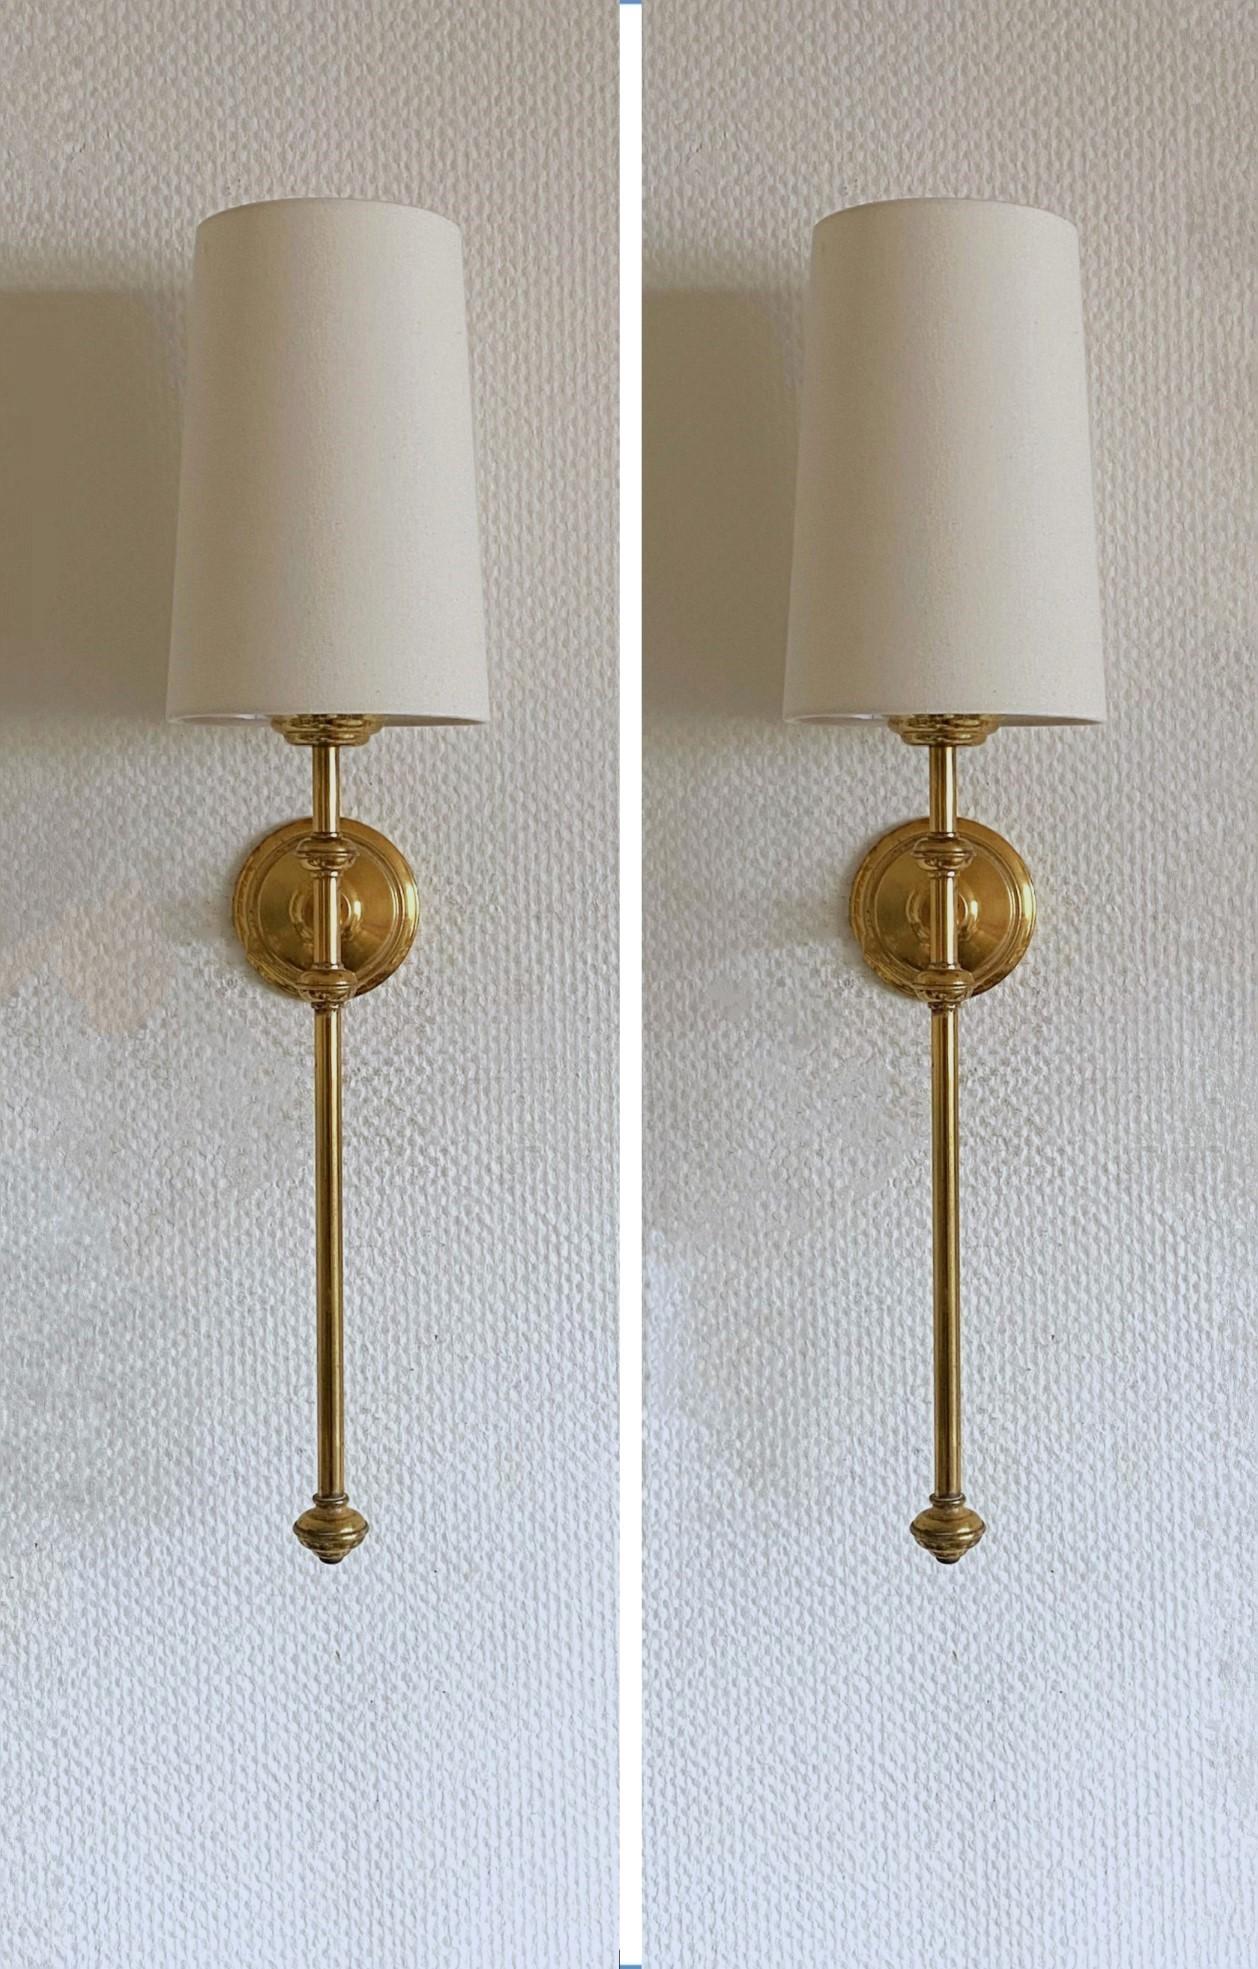 Pair of tall Art Deco torchiere wall sconces in the style of Maison Jansen, France, 1955-1959. Very elegant design made of brass with conical off-white linen shades. Each sconce takes one Edison E14 candelabra screw bulb up to 60watt.
In very good